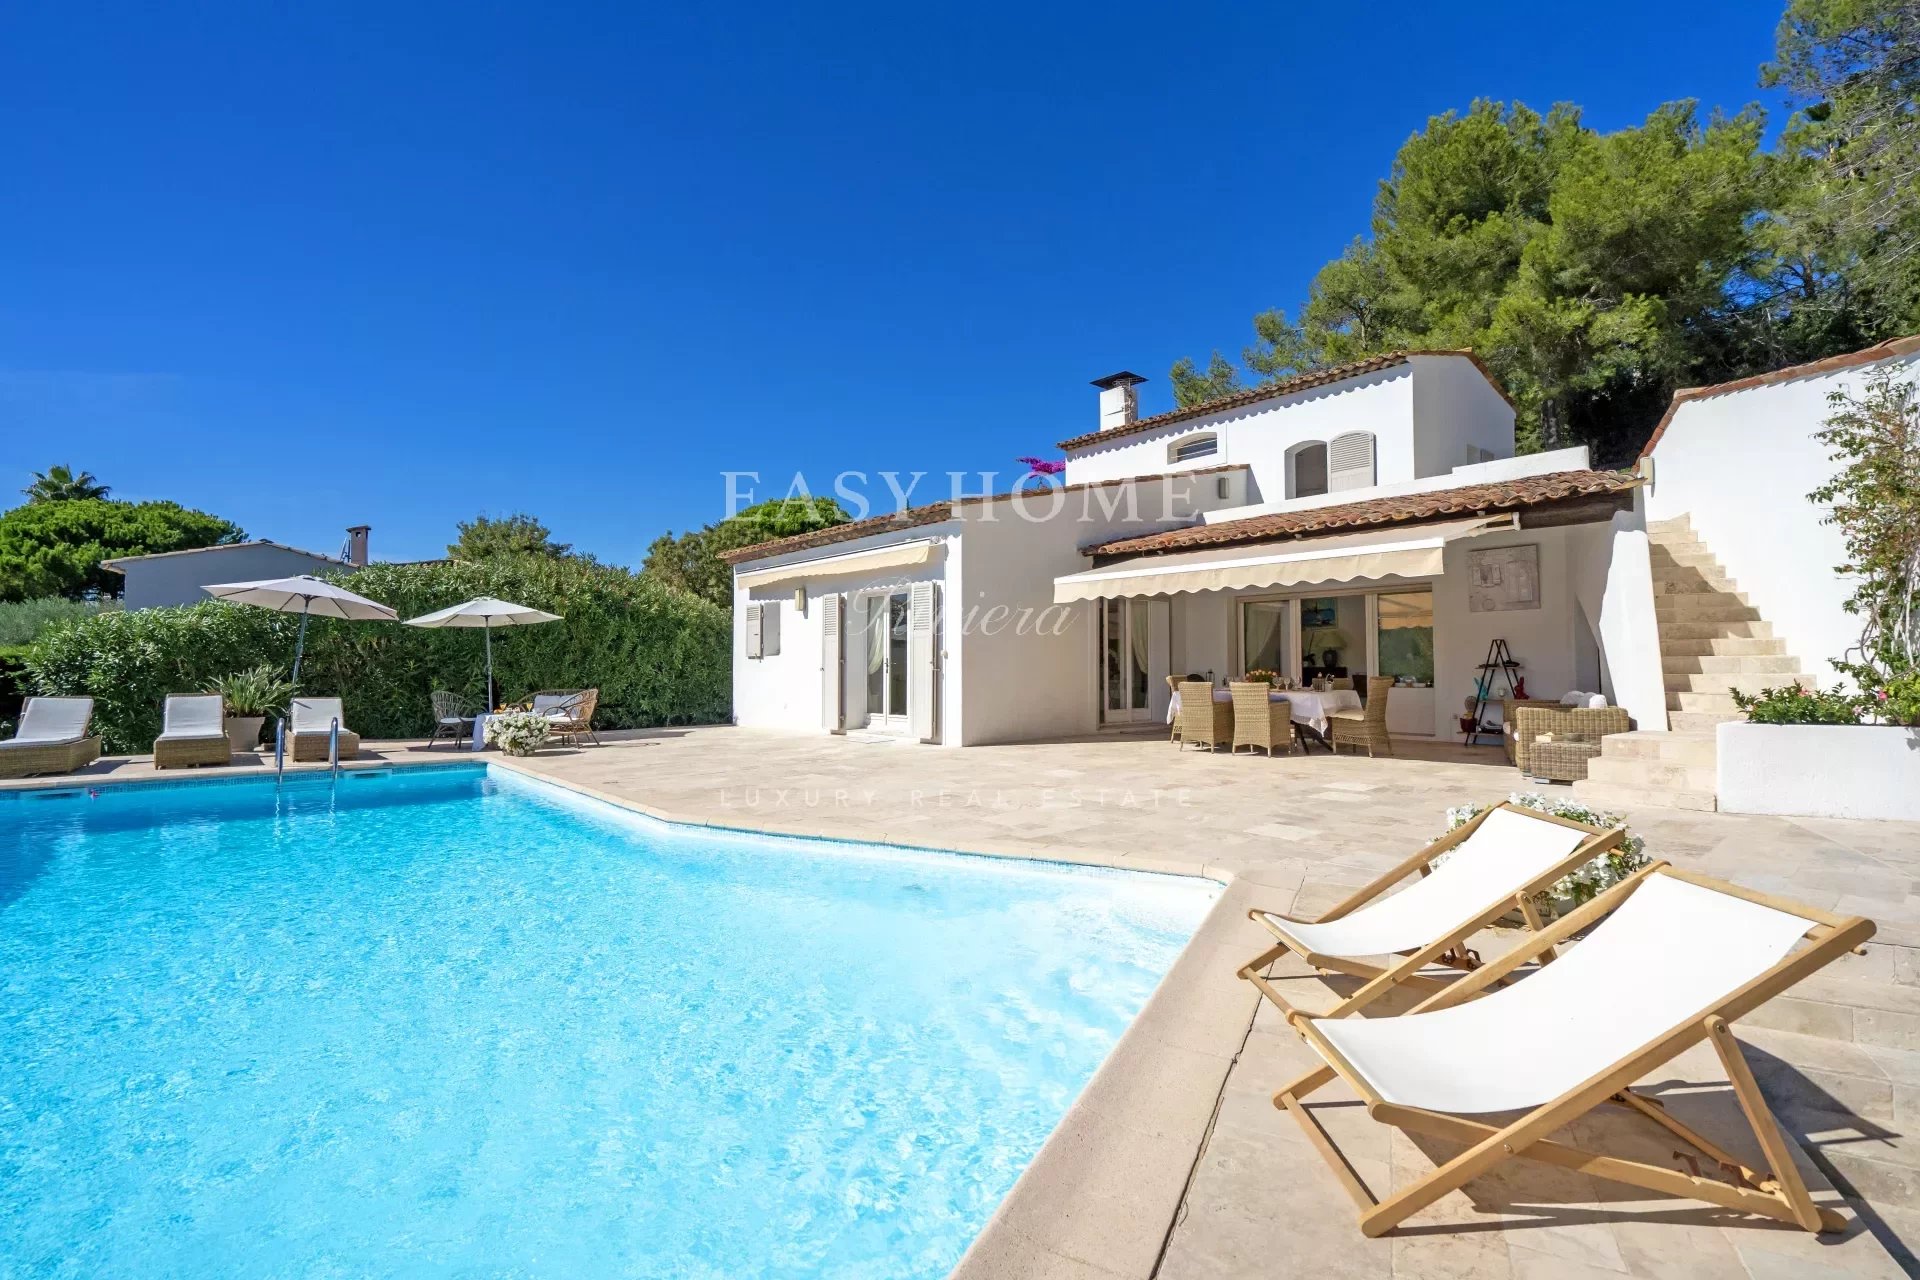 Purchase / Sale Village Mougins with village view